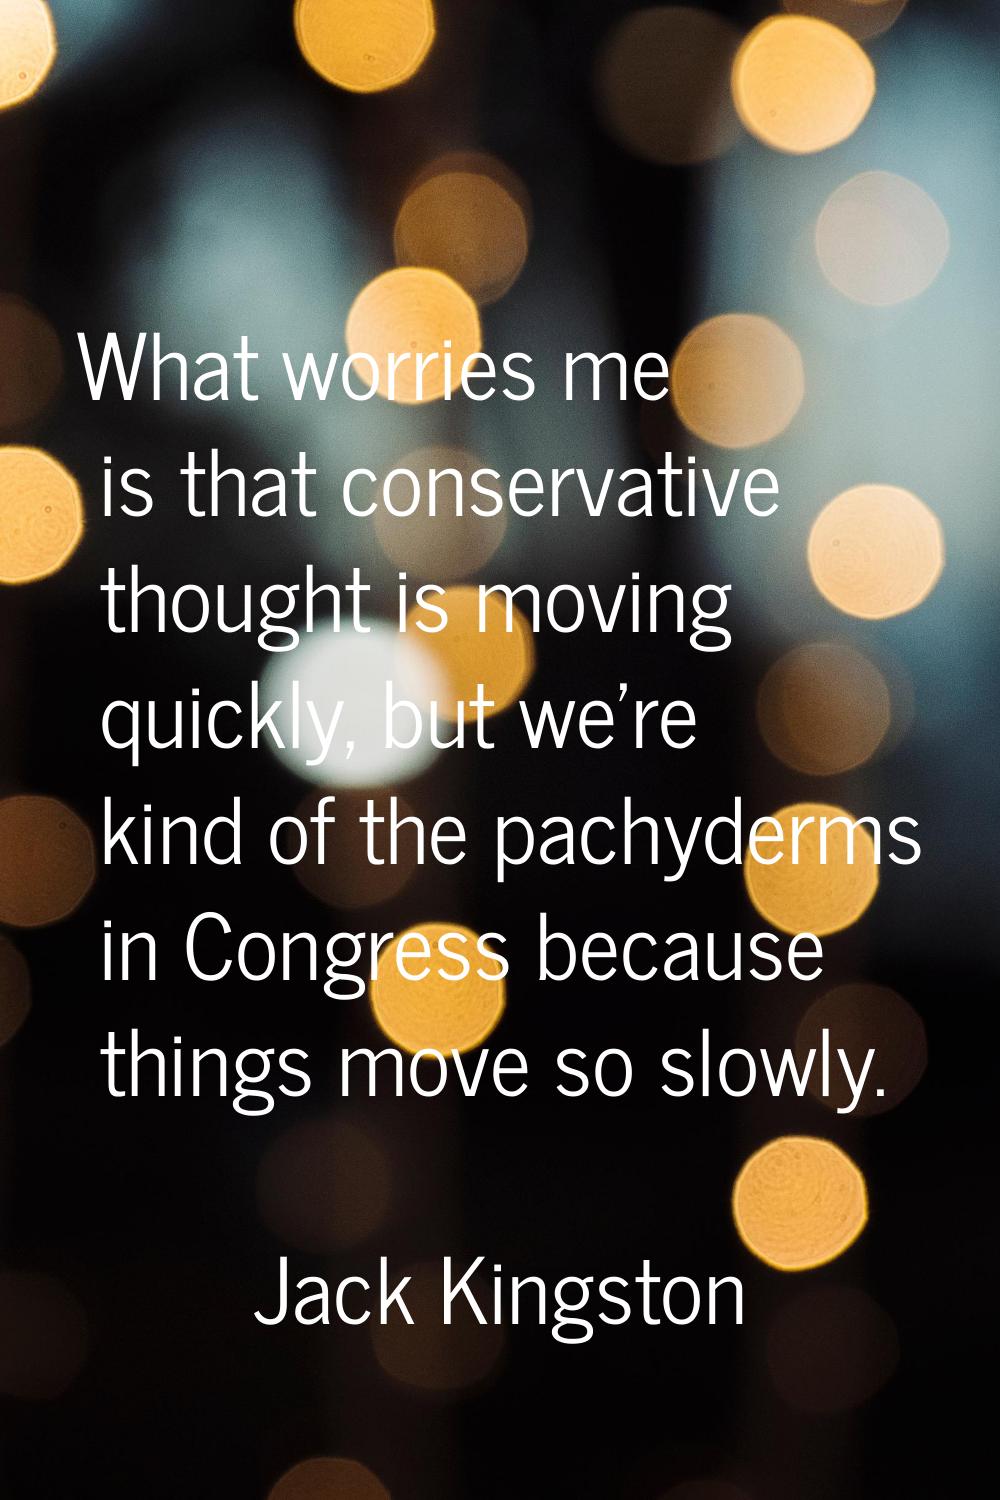 What worries me is that conservative thought is moving quickly, but we're kind of the pachyderms in